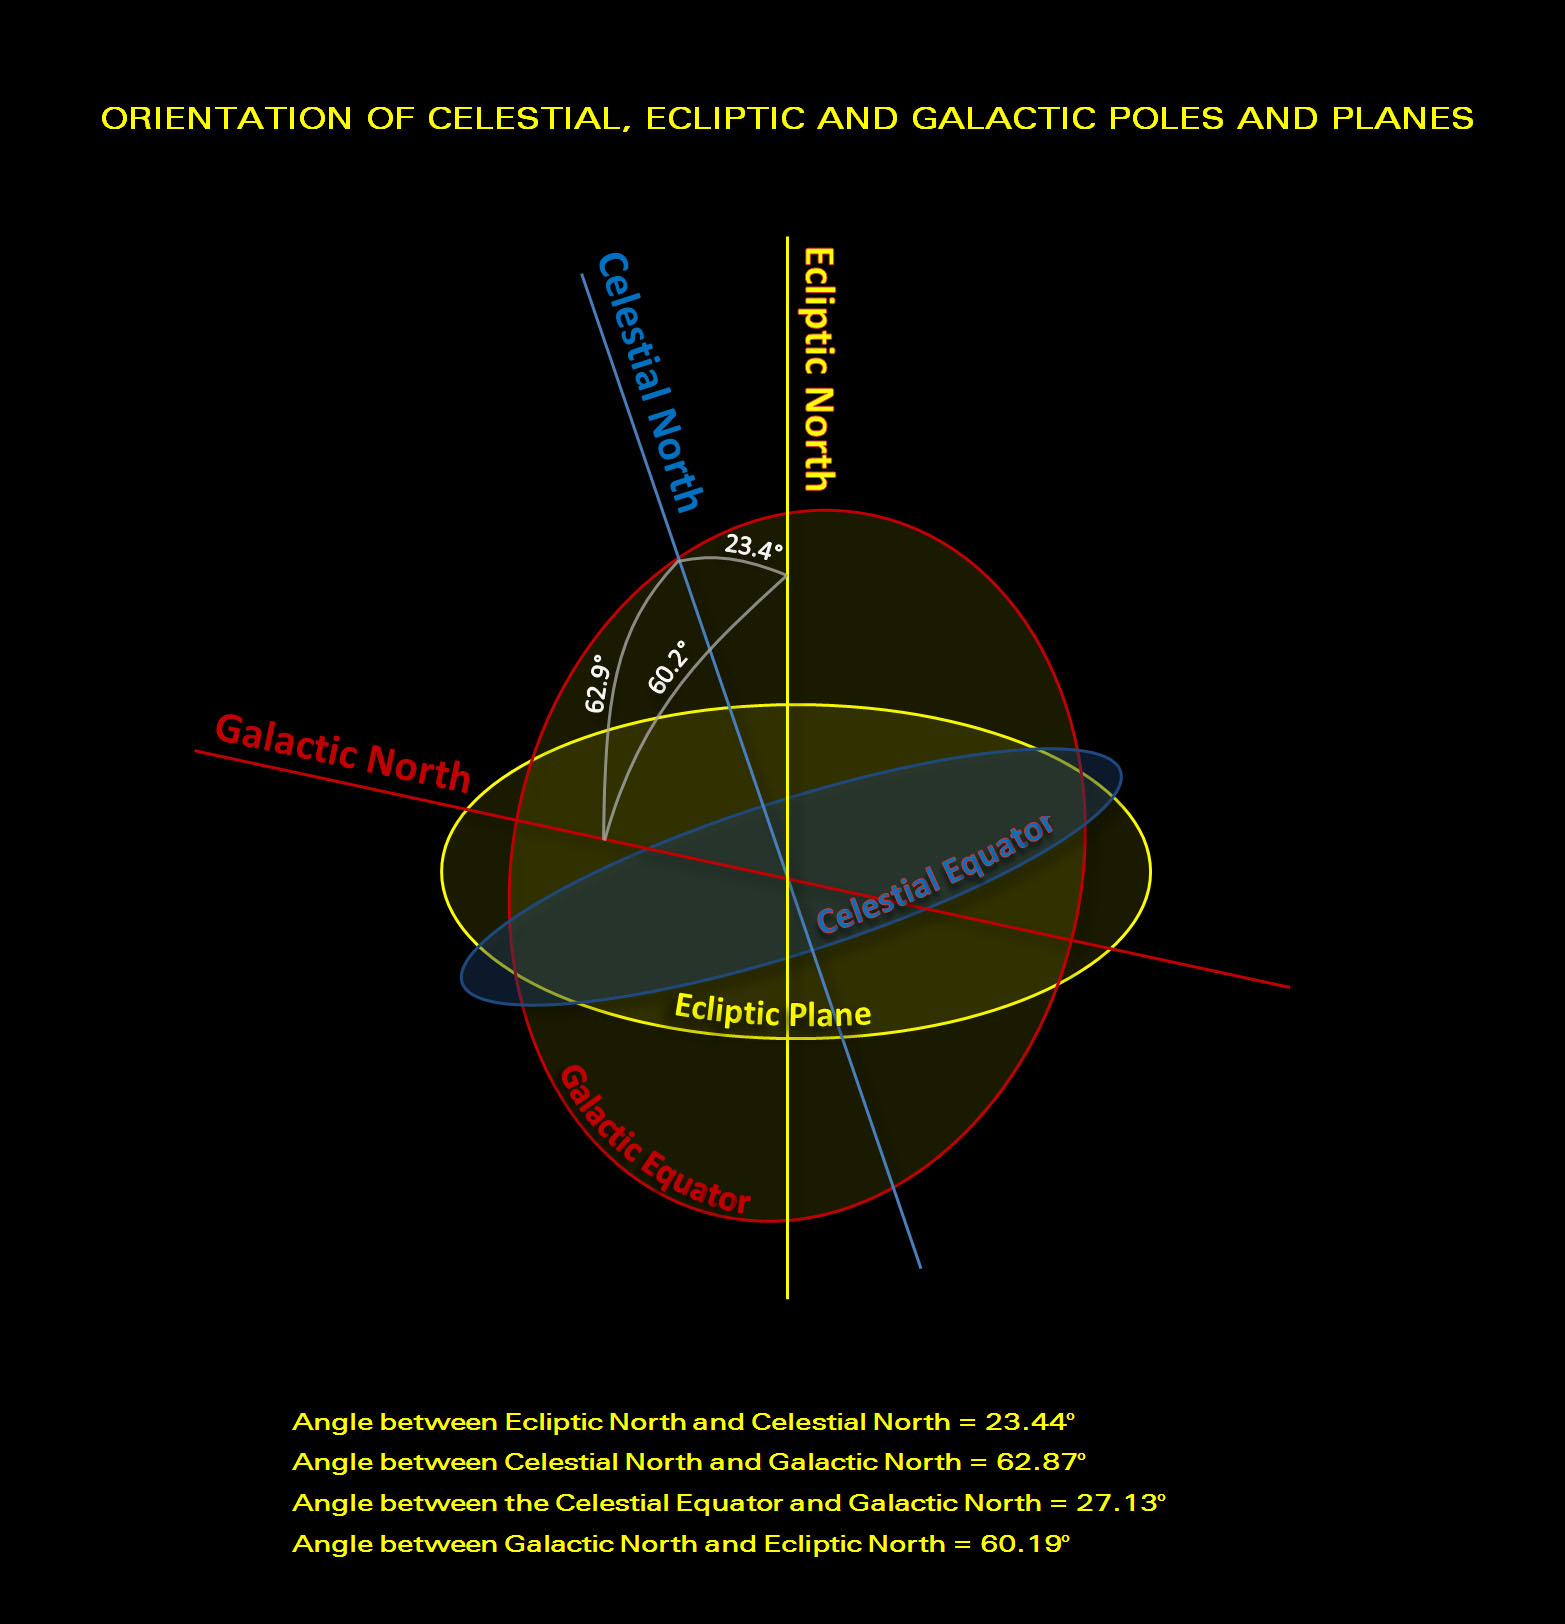 File:Orientation of Celestial, Ecliptic and Galactic Poles and Planes.jpg